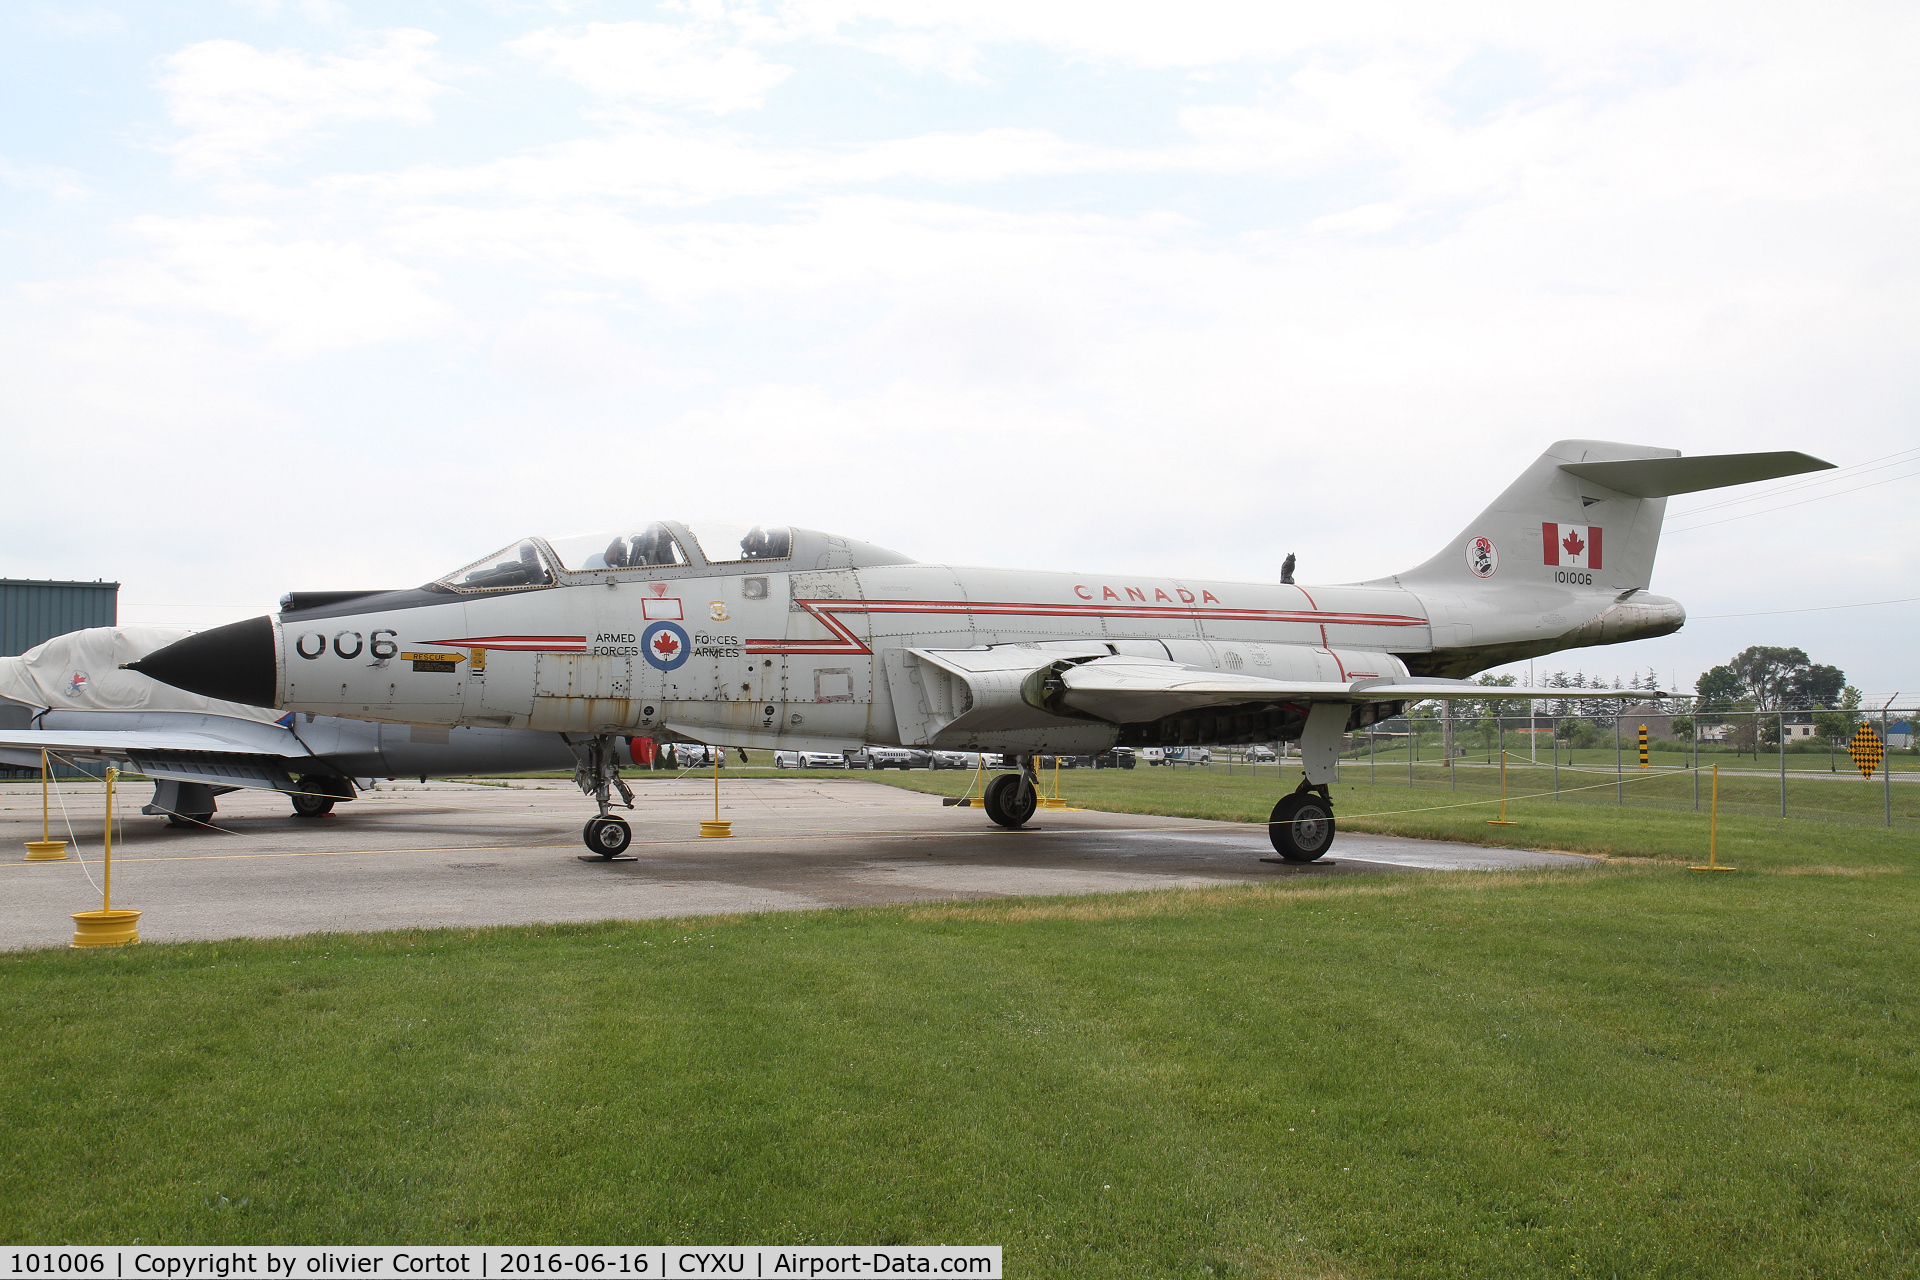 101006, 1956 McDonnell CF-101F Voodoo C/N 420, was the last flying CF-101B of the CAF